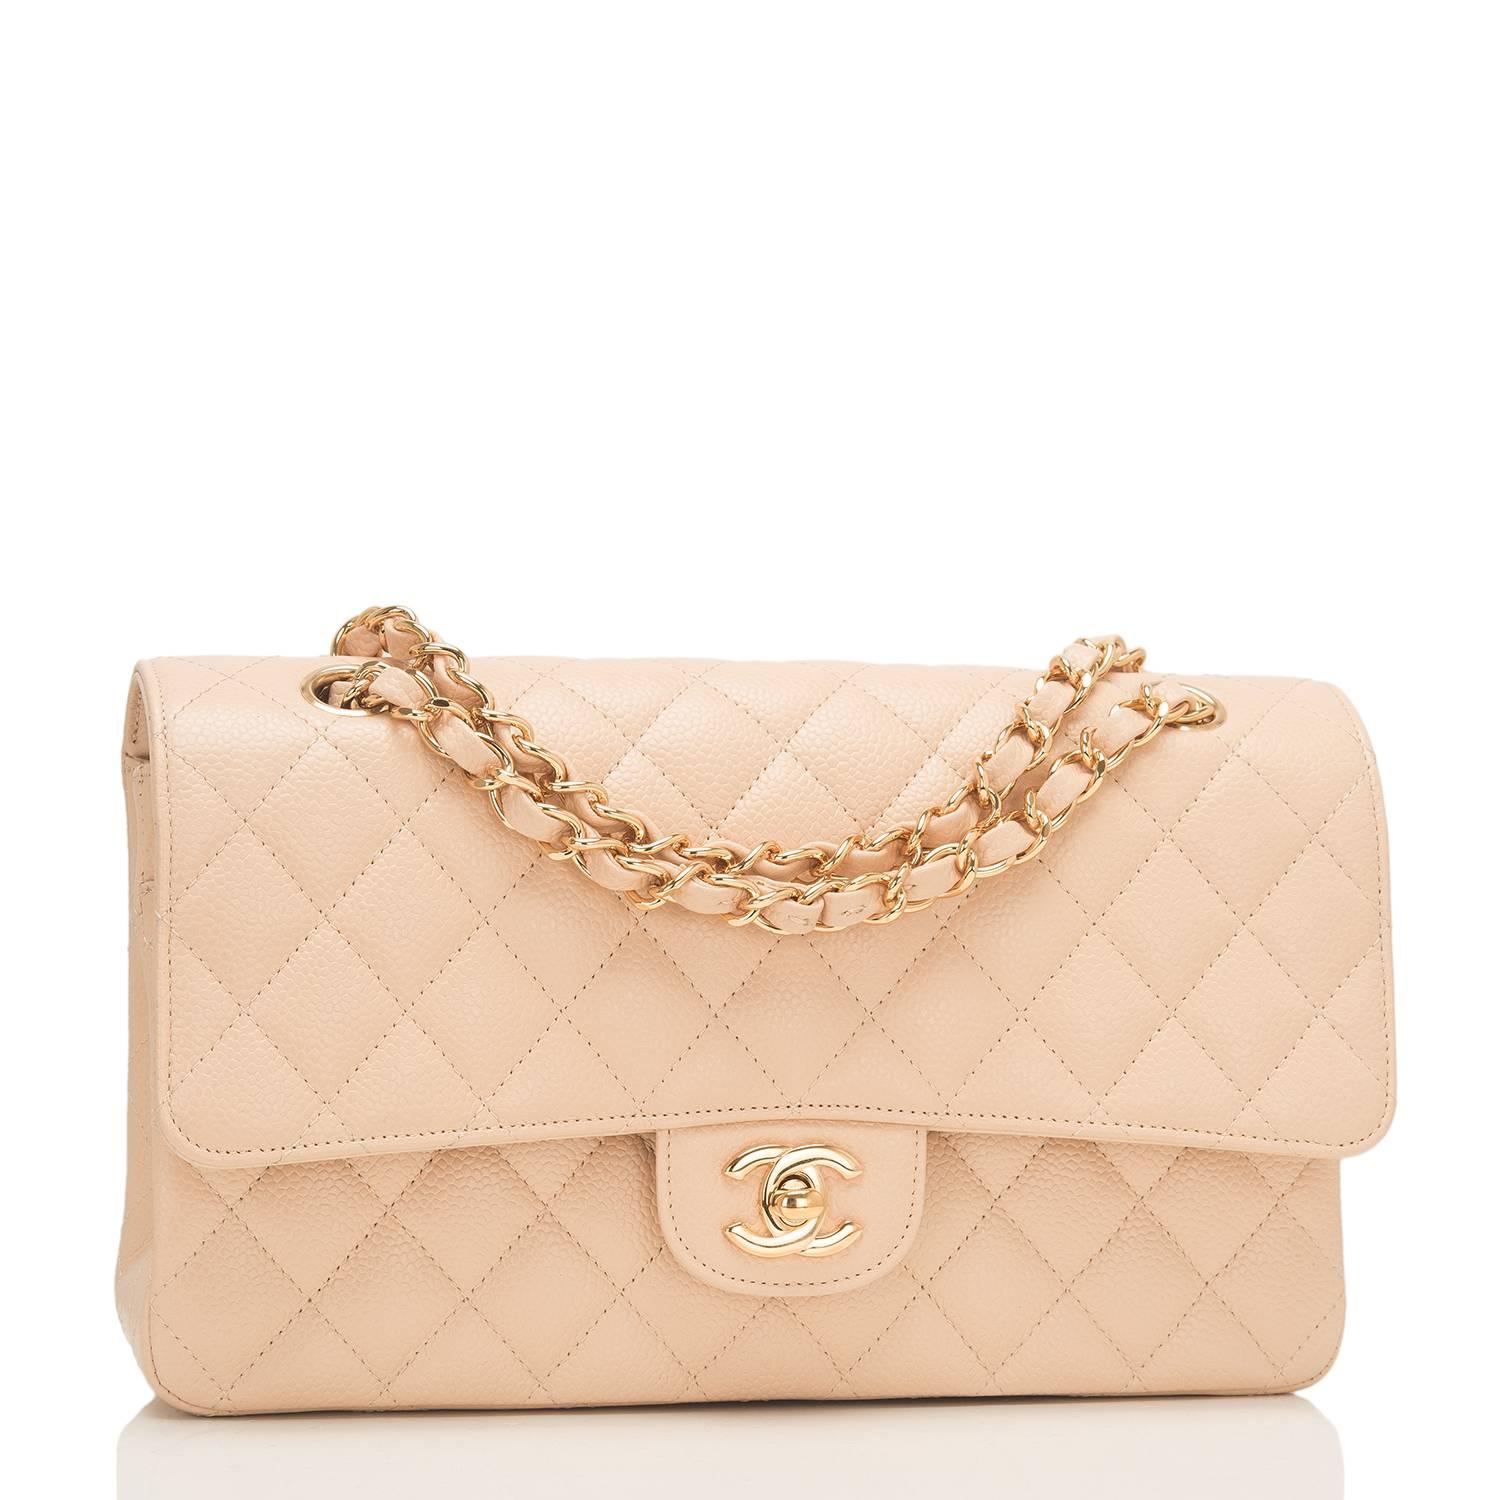 Chanel Medium Classic double flap bag of beige caviar leather with gold tone hardware.

This bag features a front flap with signature CC turnlock closure, a half moon back pocket, and an adjustable interwoven gold tone chain link with beige leather